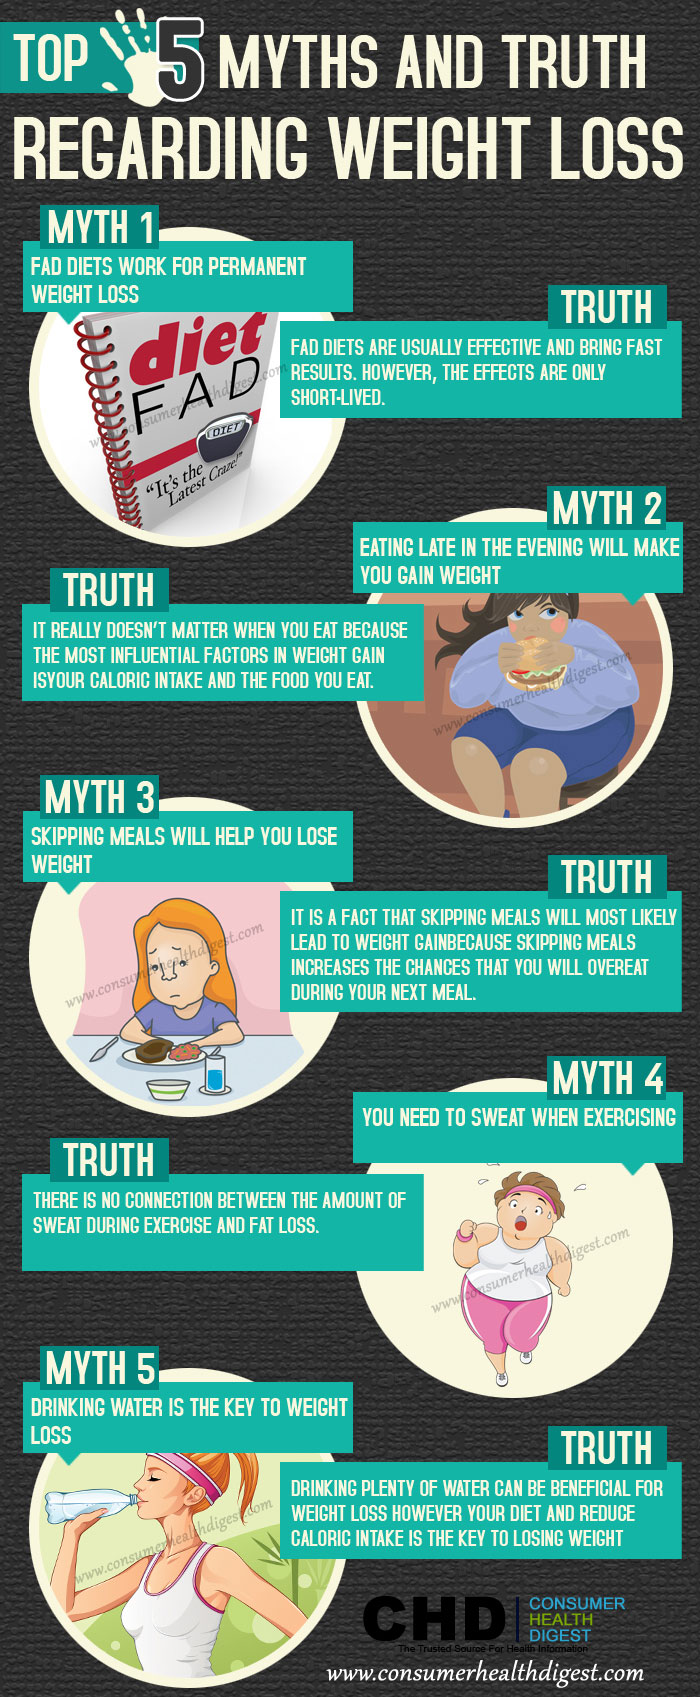 08 top-5-myths-and-truth-about-weight-loss